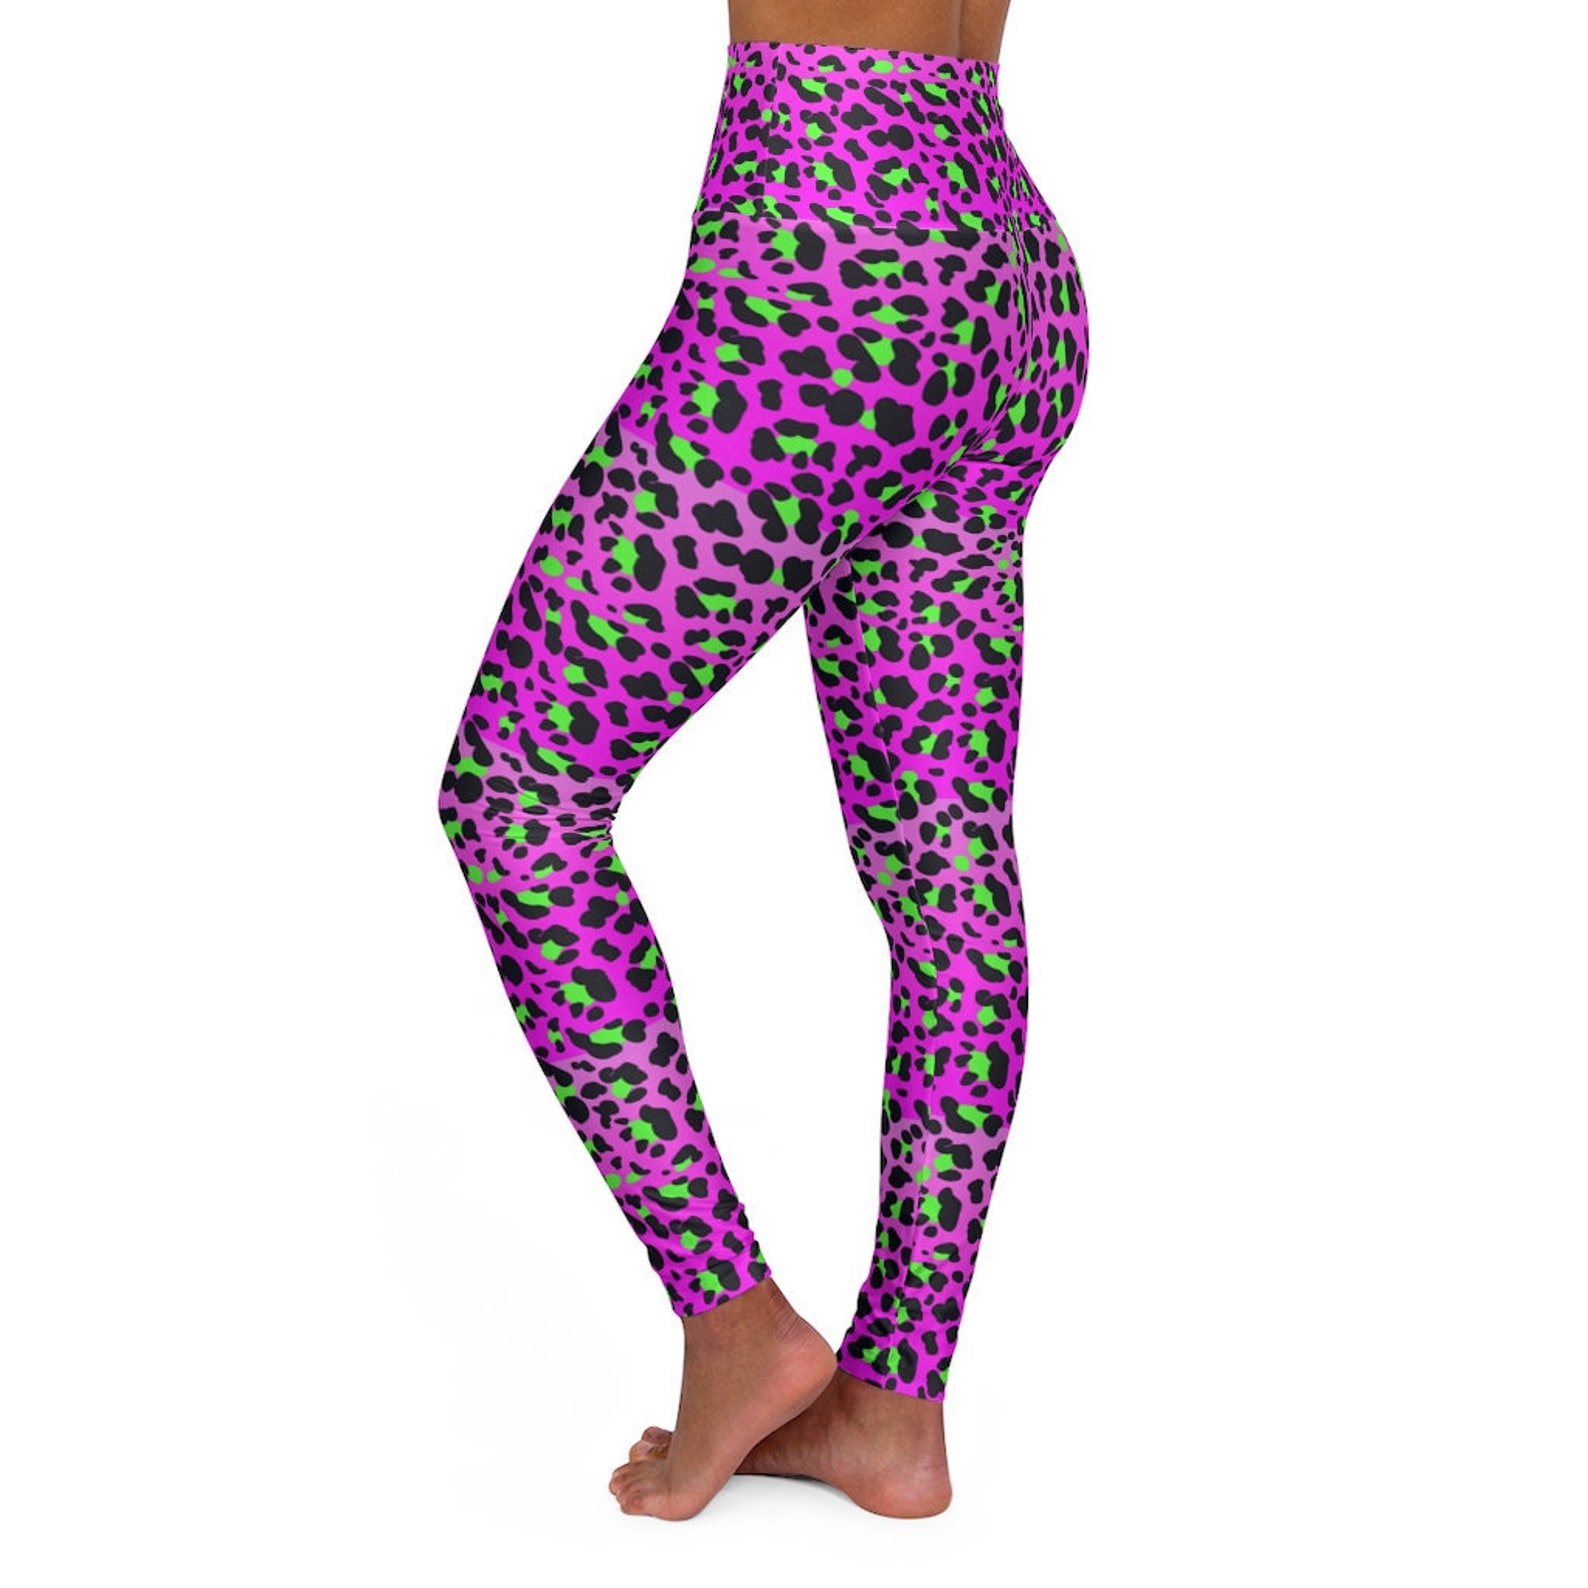 10 Minute Pink leopard workout pants for push your ABS